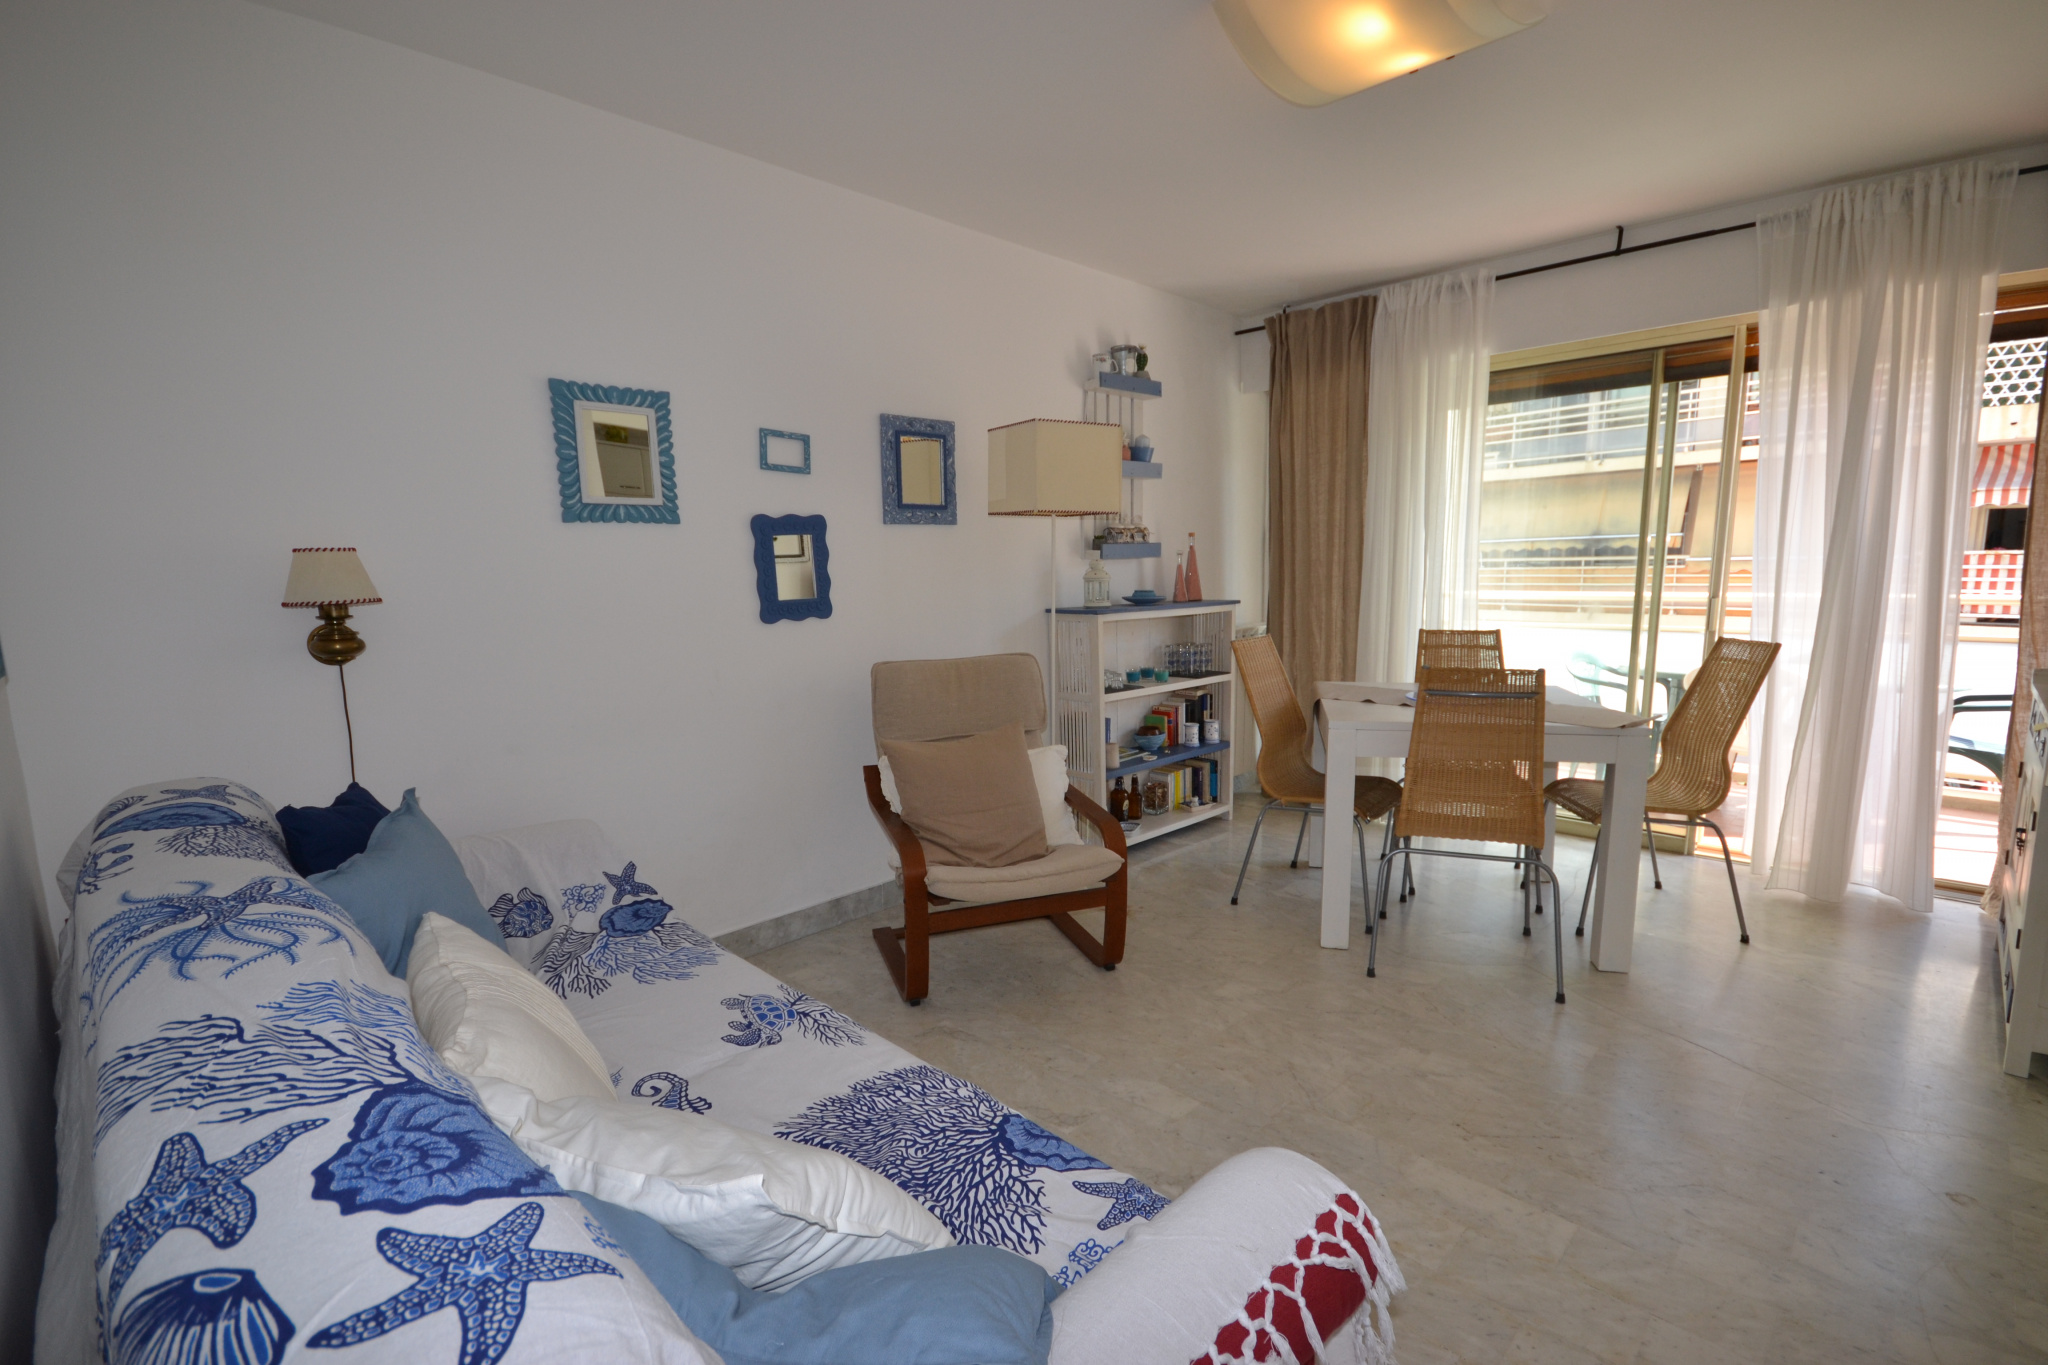 Appartement 2 pièces - 35m² - ANTIBES